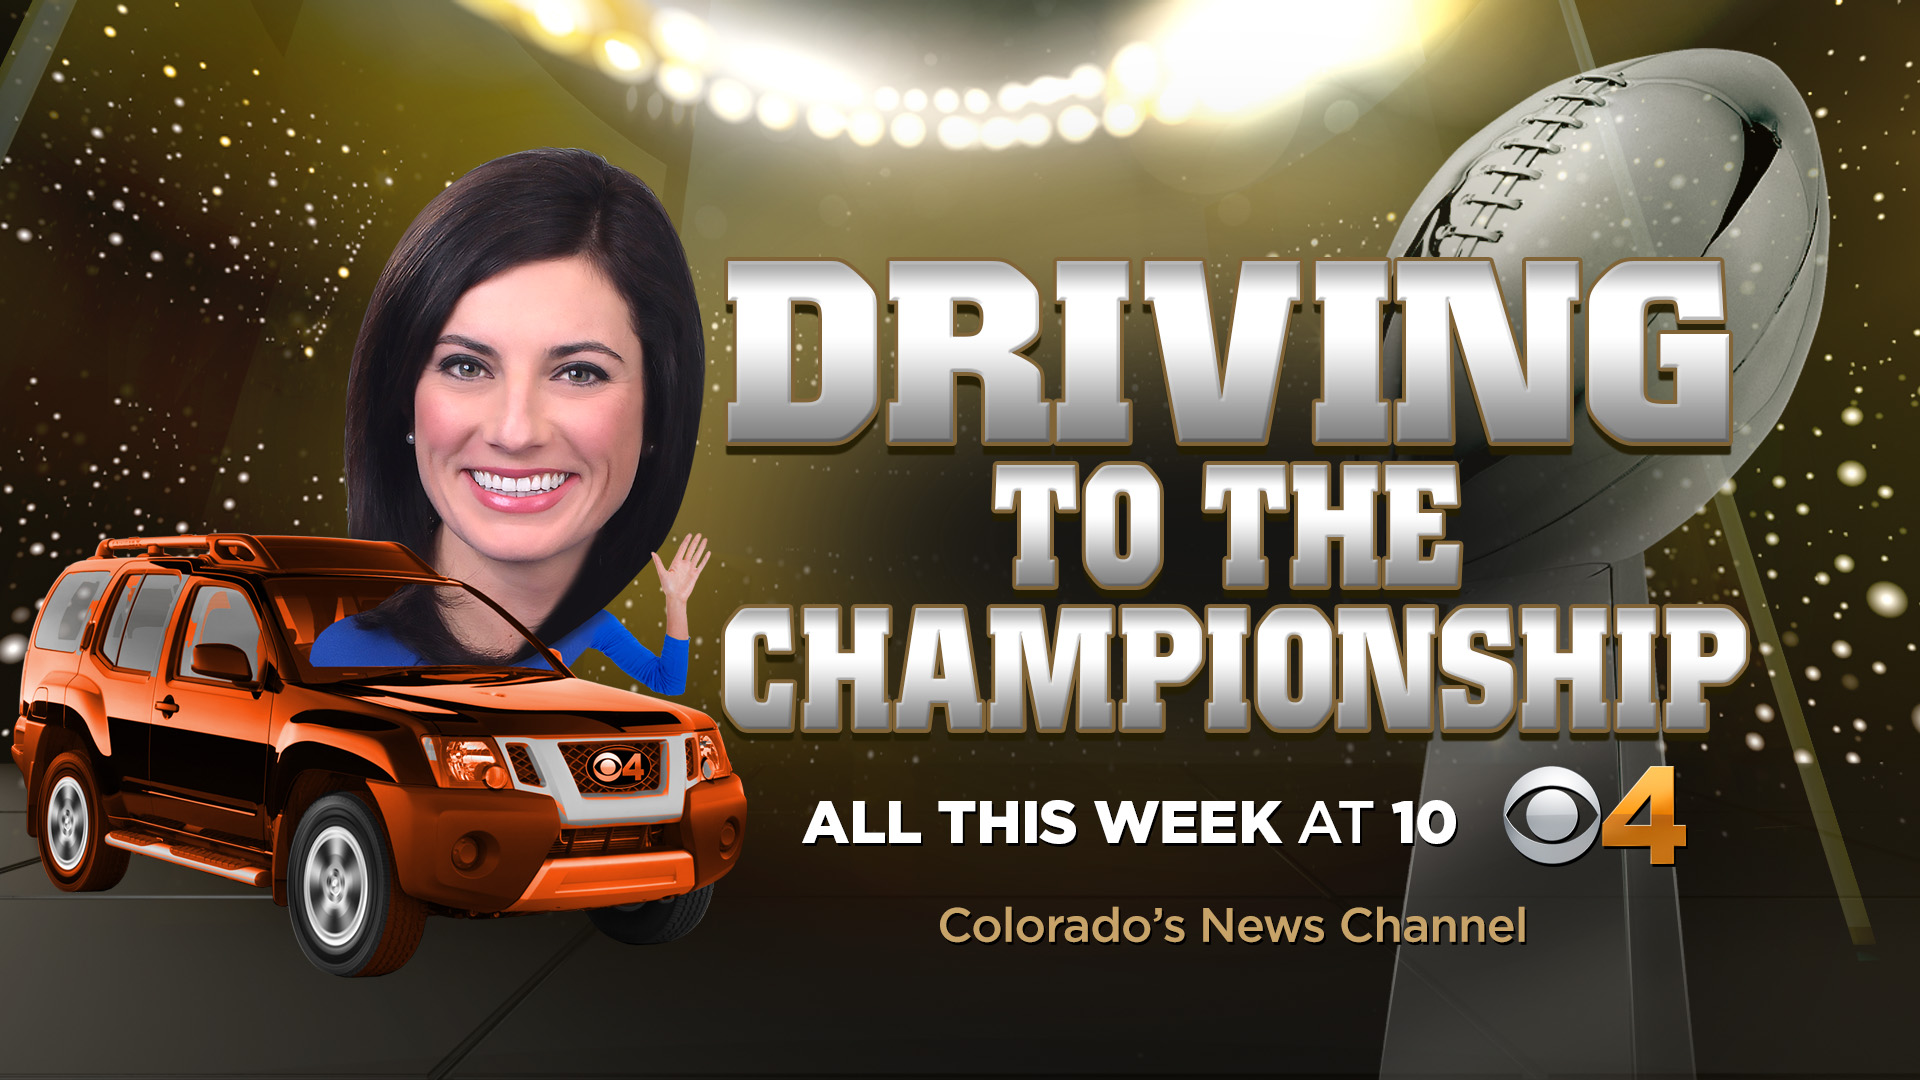 CBS4's Jamie Leary is driving to the Super Bowl and reporting from the road this week (credit: CBS)